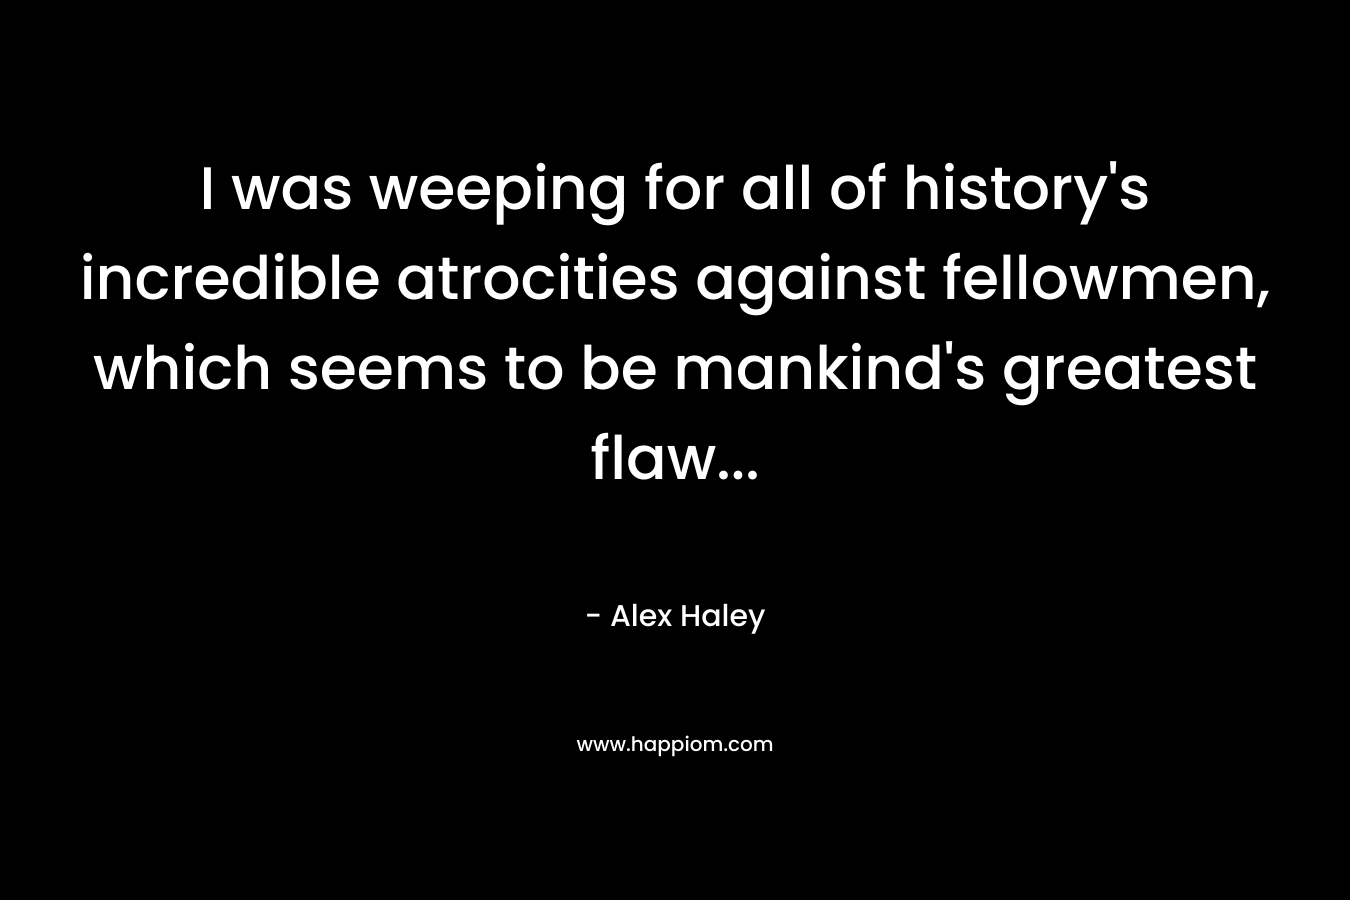 I was weeping for all of history’s incredible atrocities against fellowmen, which seems to be mankind’s greatest flaw… – Alex Haley